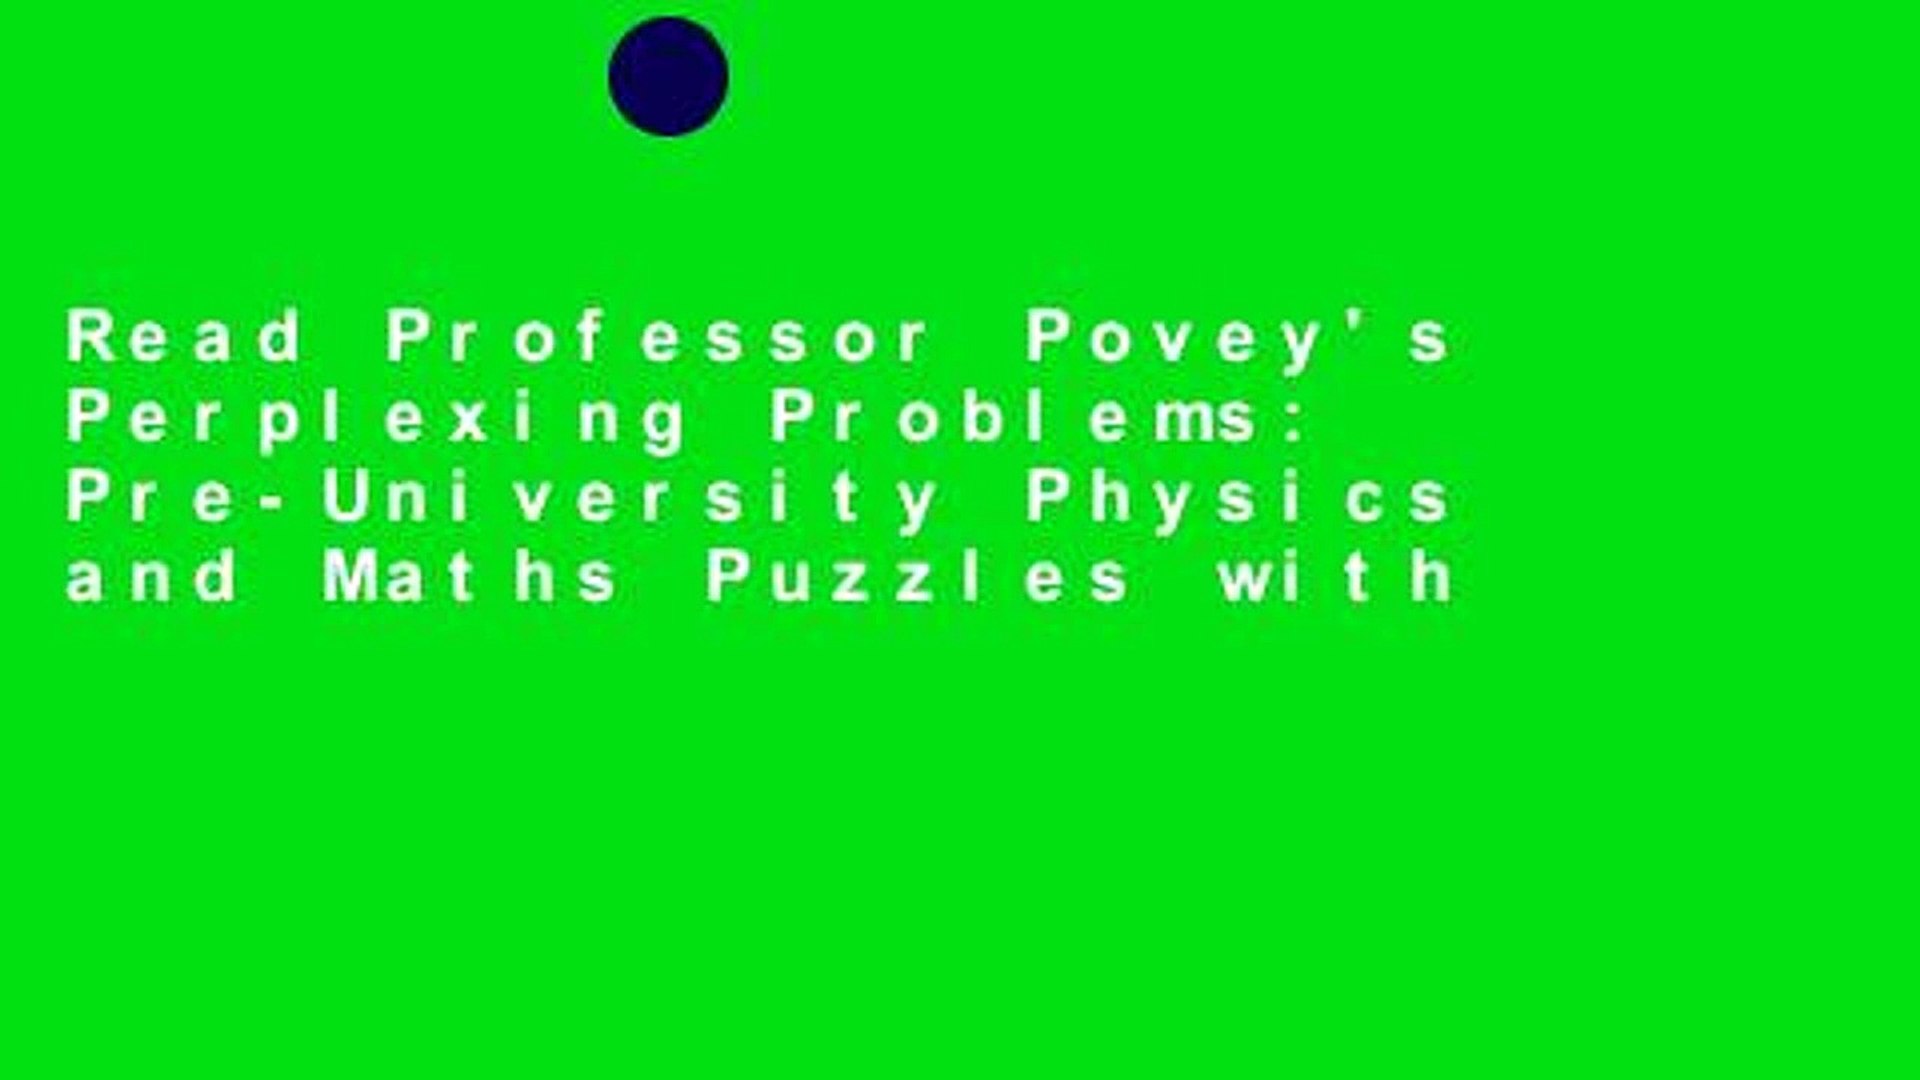 Pre-university Physics and Maths Puzzles with Solutions Professor Poveys Perplexing Problems